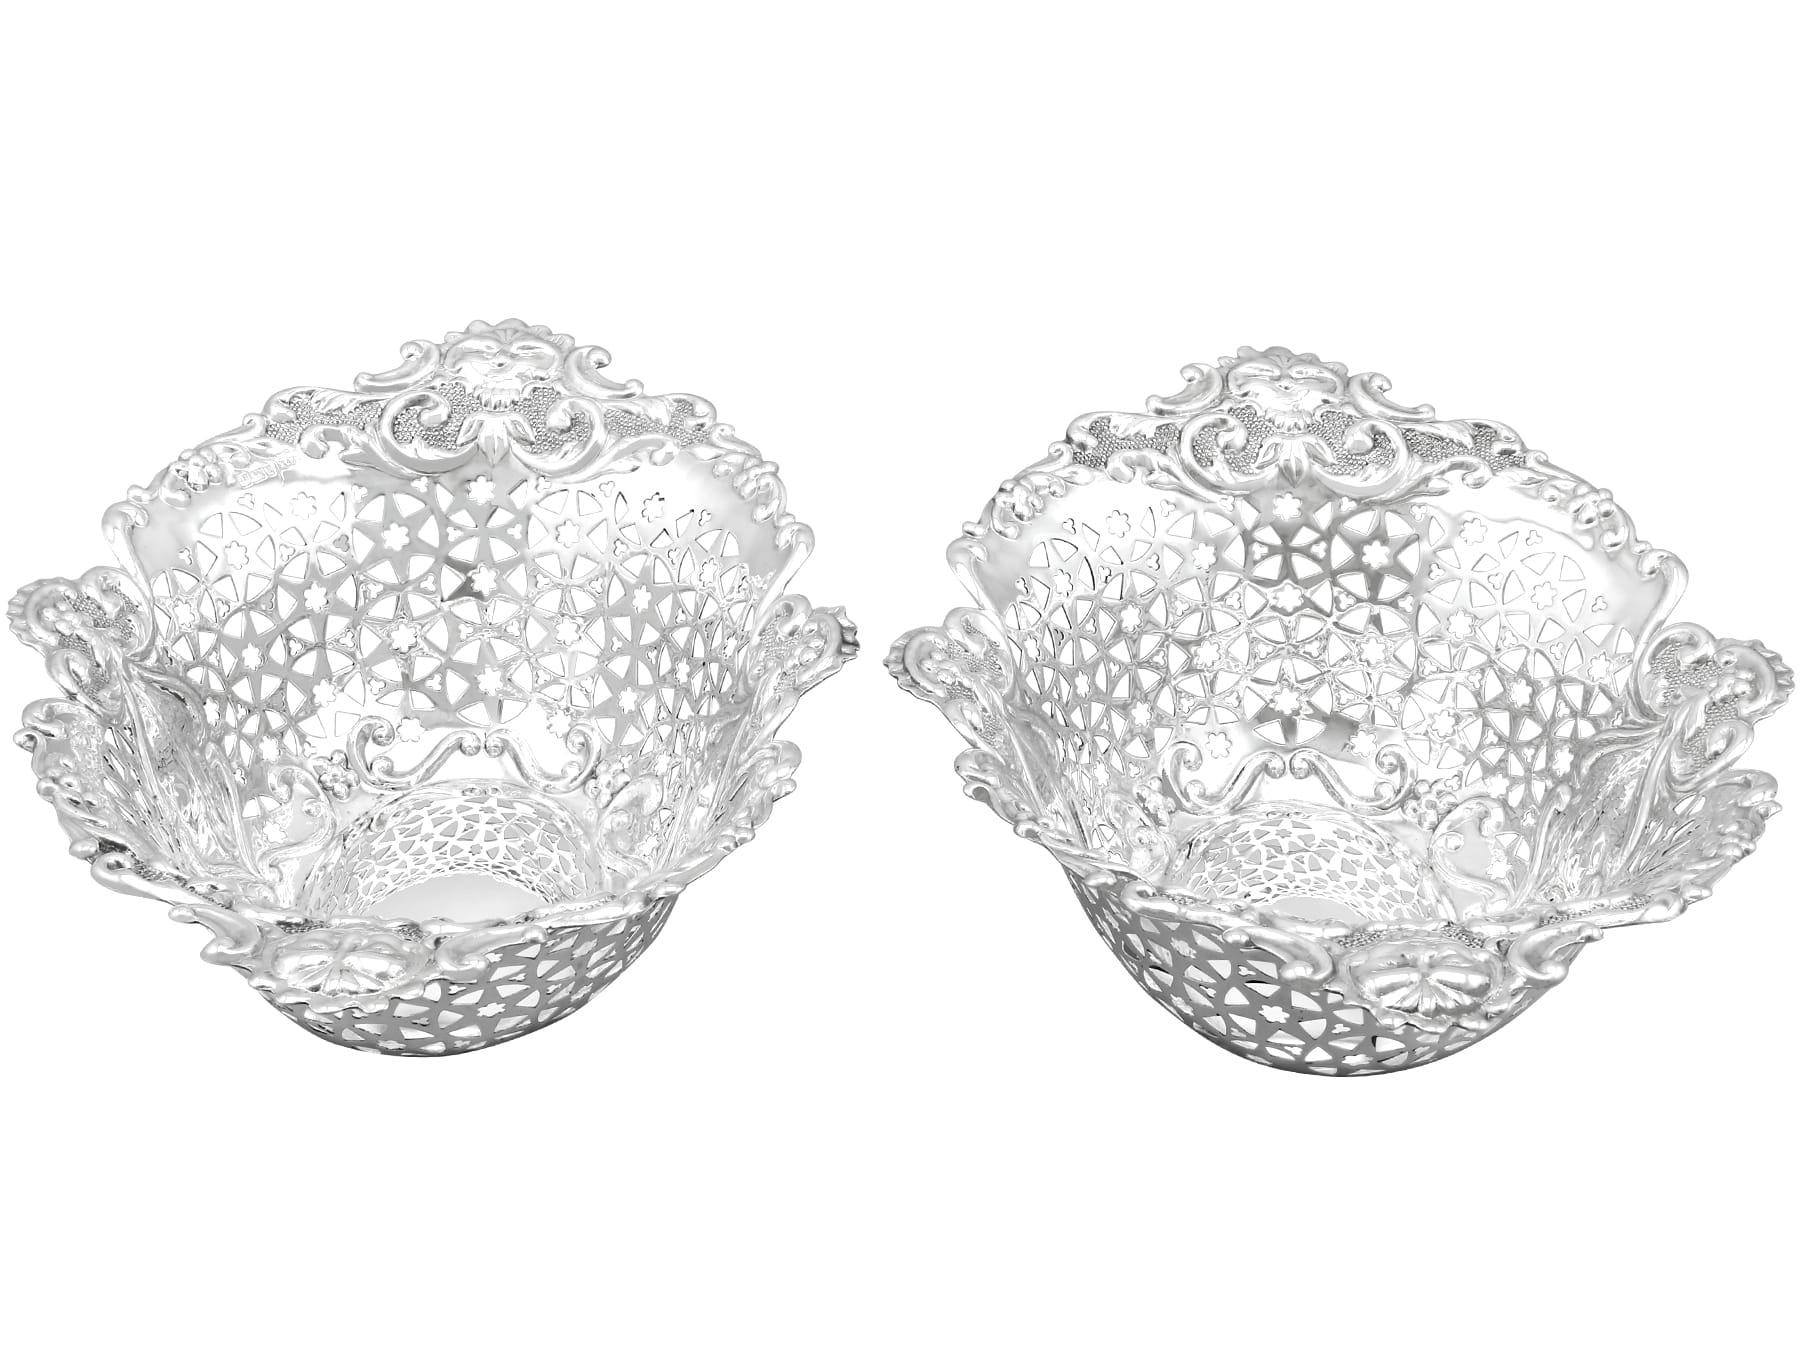 An exceptional, fine and impressive pair of antique Edwardian English sterling silver dishes; an addition to our silver tableware collection.

These exceptional antique silver dishes, in sterling standard, have an oval rounded form.

The surfaces of